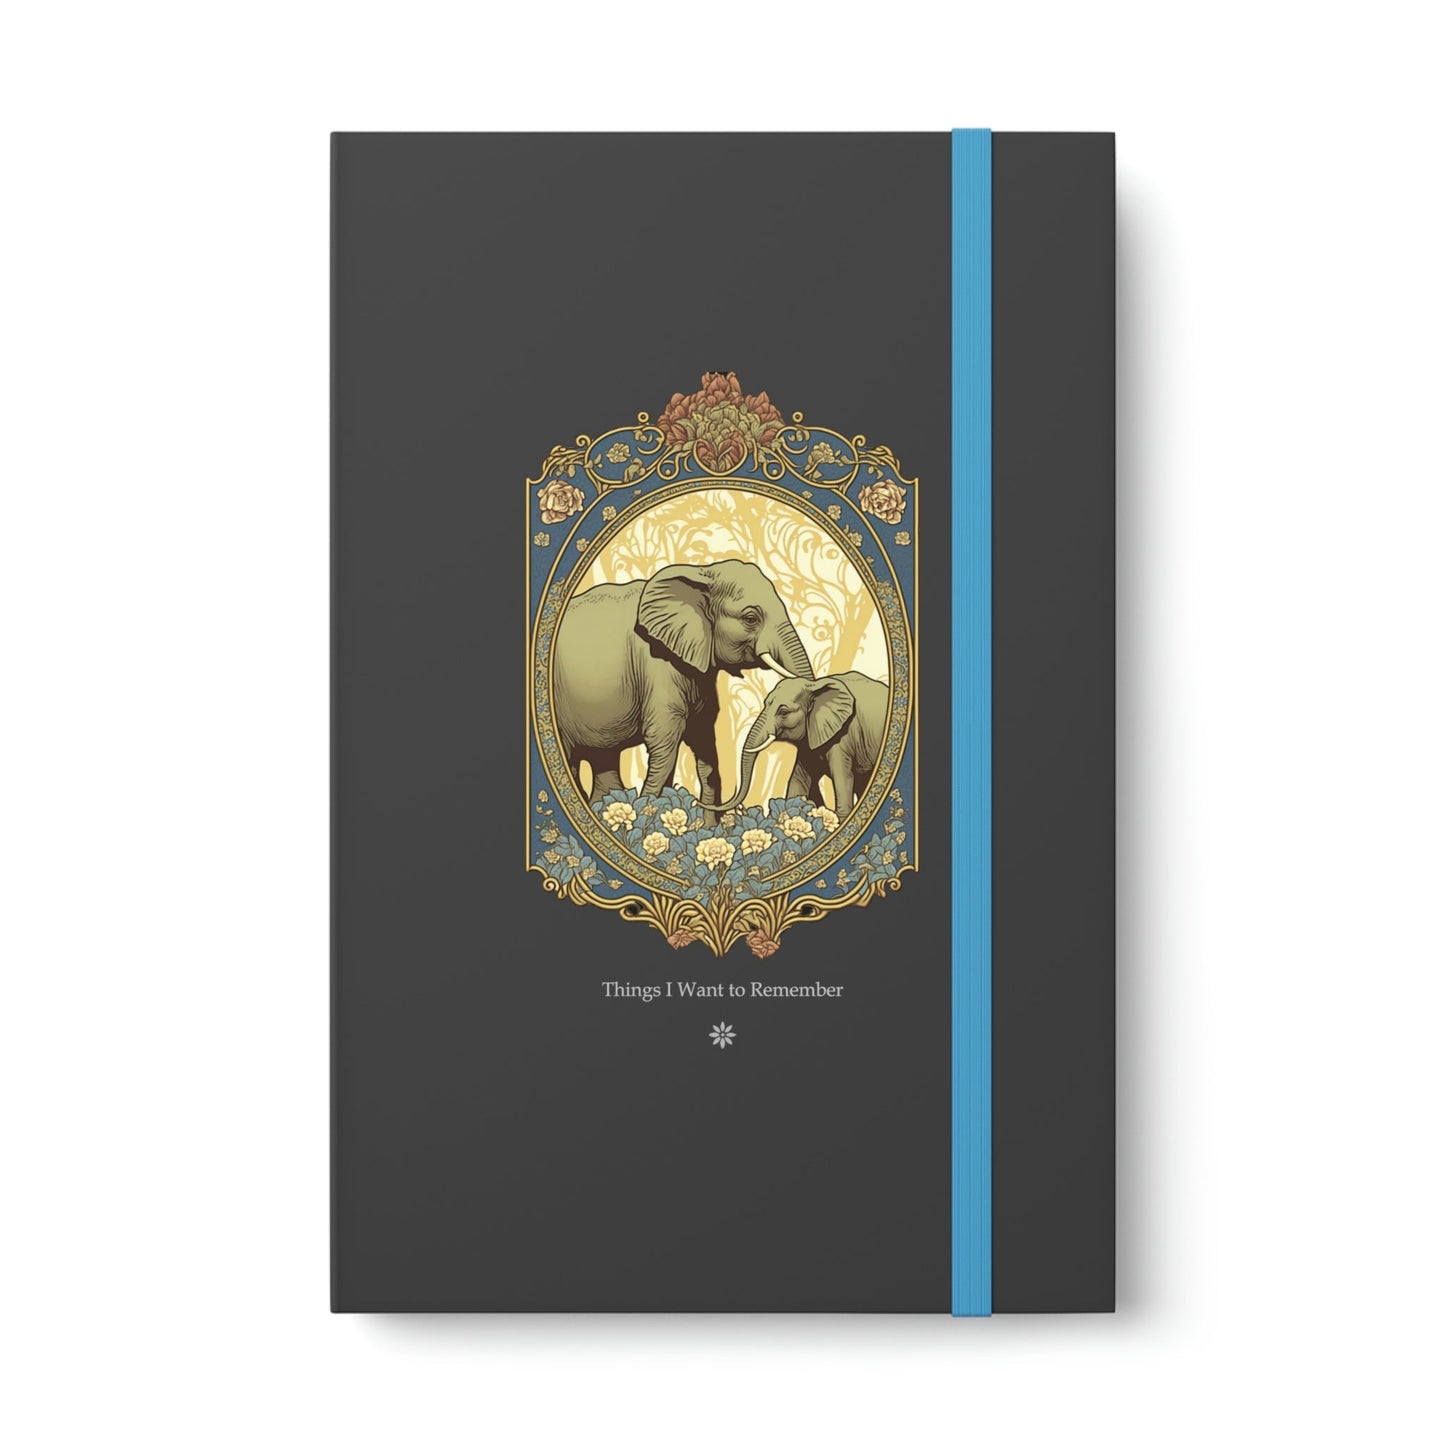 Elephant "Things to Remember" Color Contrast Notebook Journal - Ruled